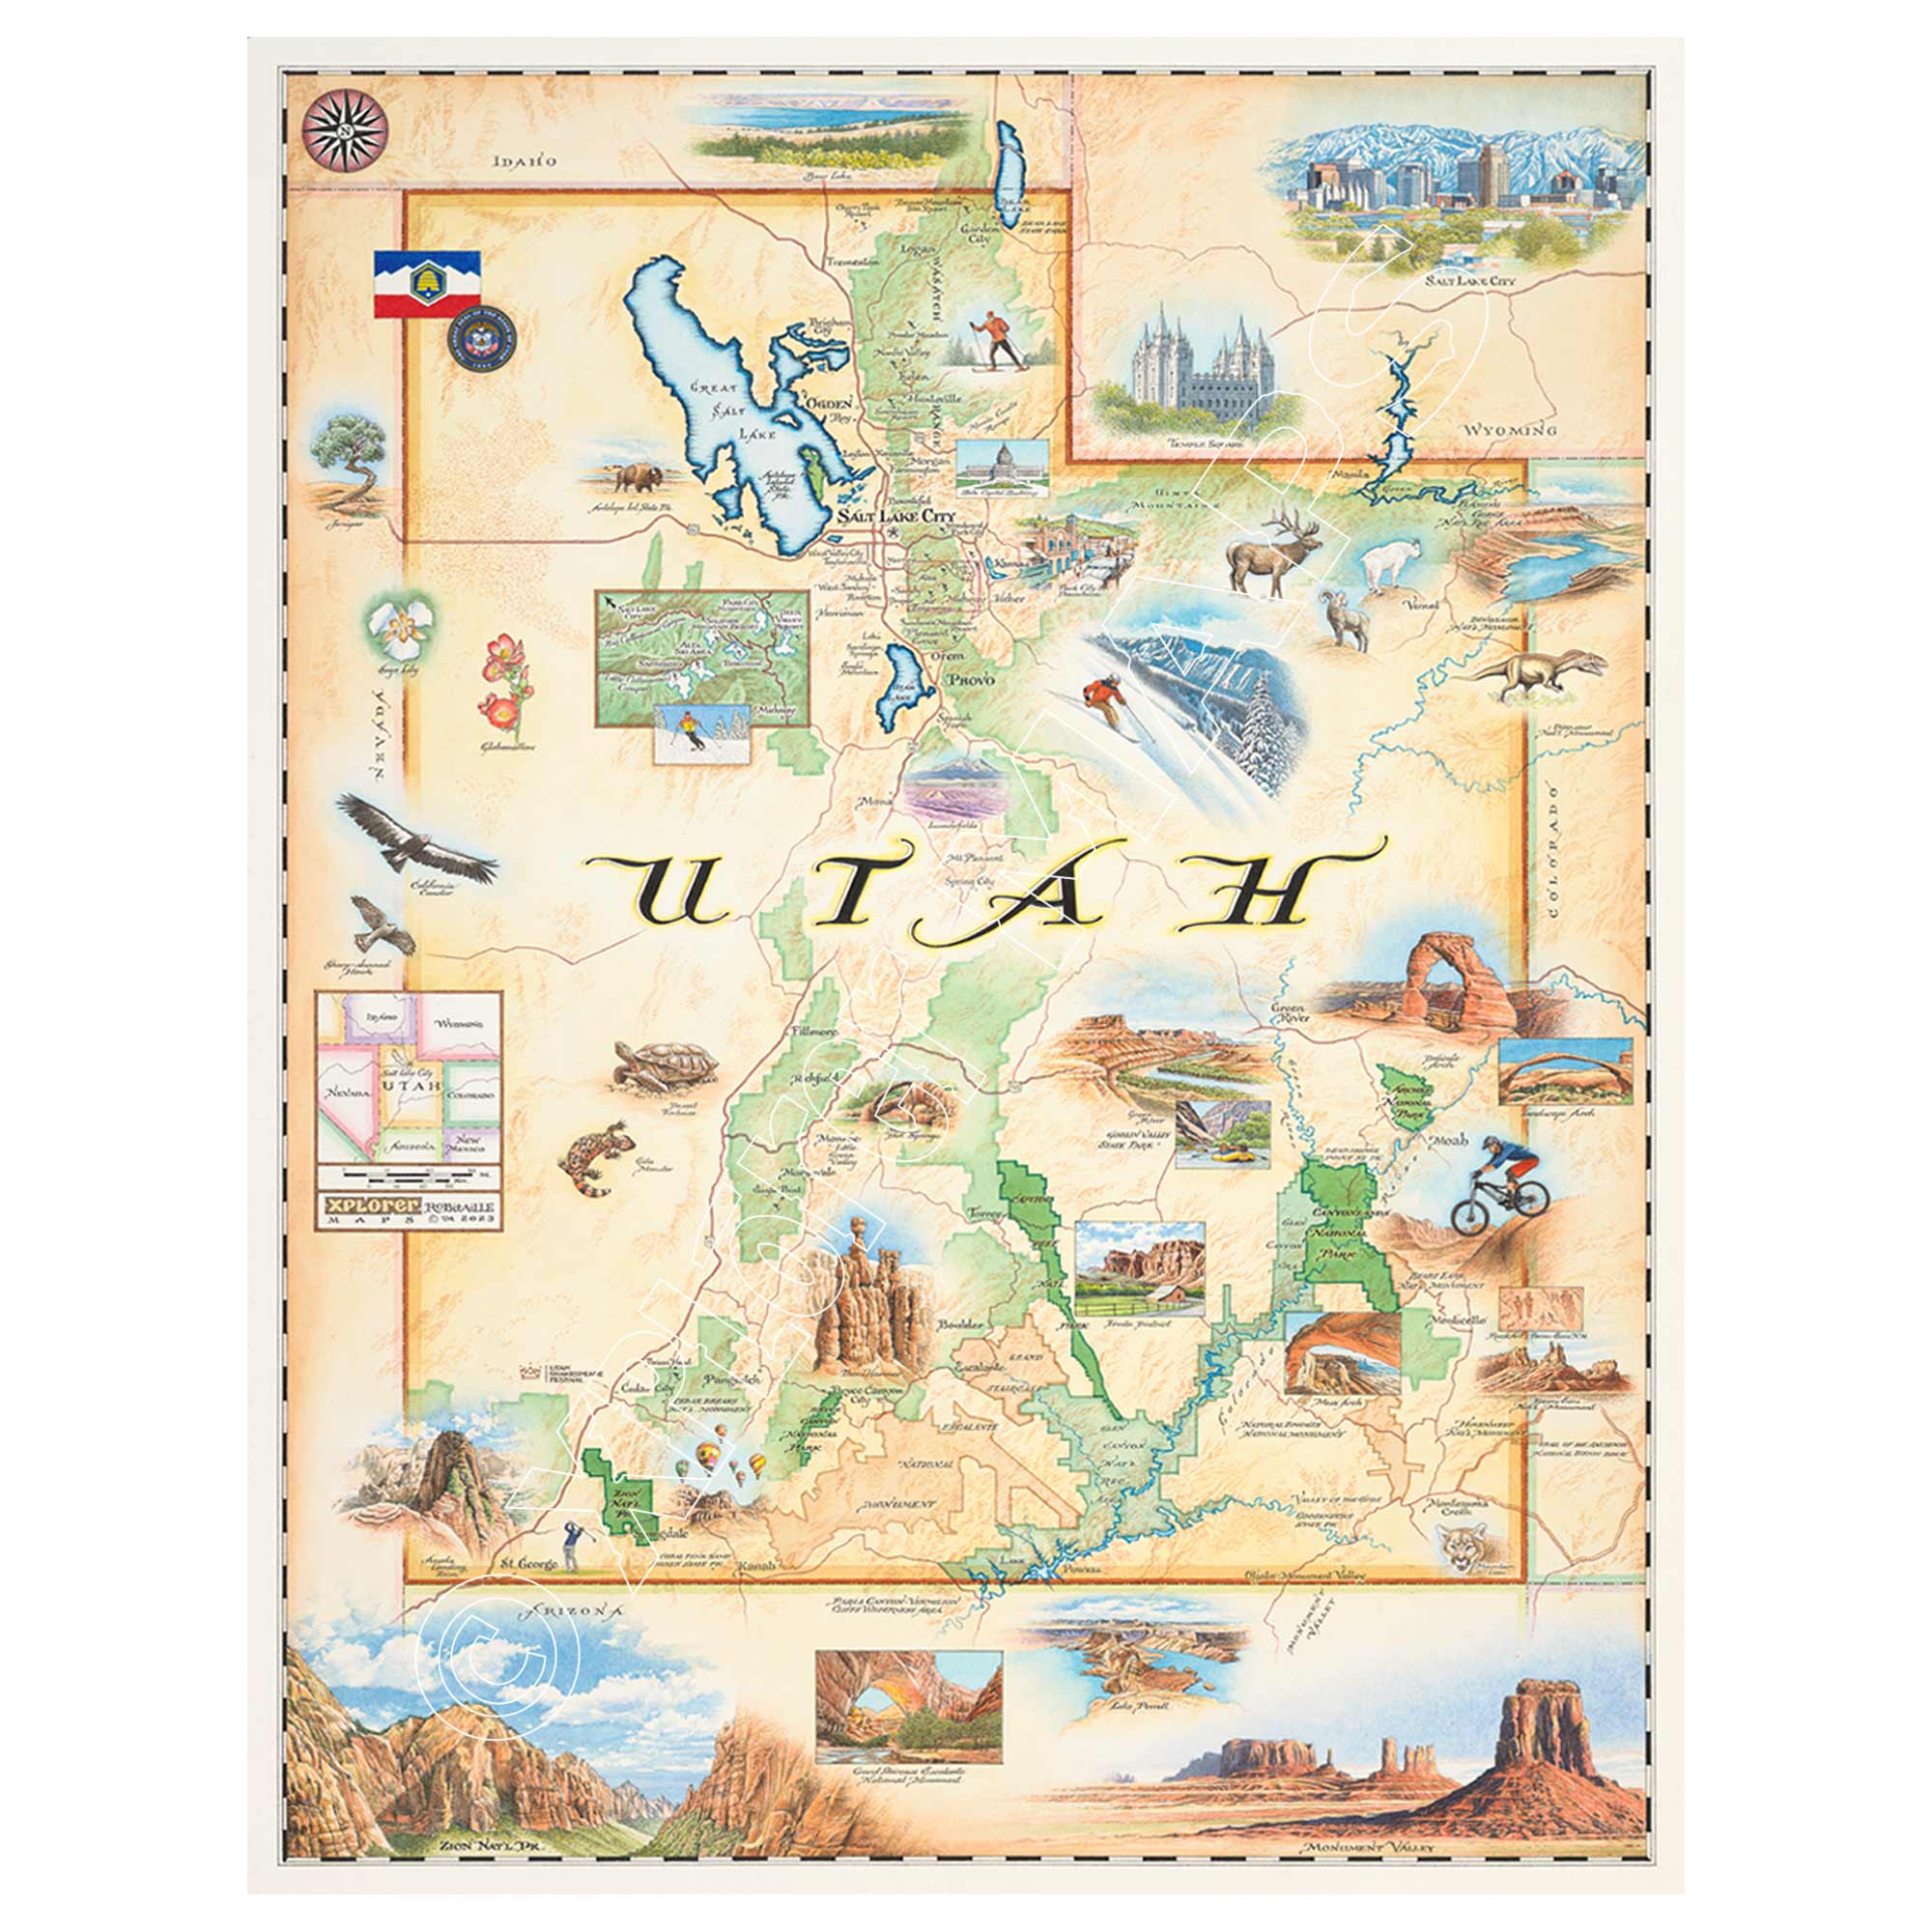 Utah State hand-drawn map by Xplorer Maps. The art print showcases National Parks, including Arches and Canyonlands, Bryce Canyon, Monument Valley, and Zion. Popular activities such as mountain biking, skiing, river rafting, and hot air balloons are depicted. The map also features various animals, including dinosaurs, deer, turtles, lizards, and birds